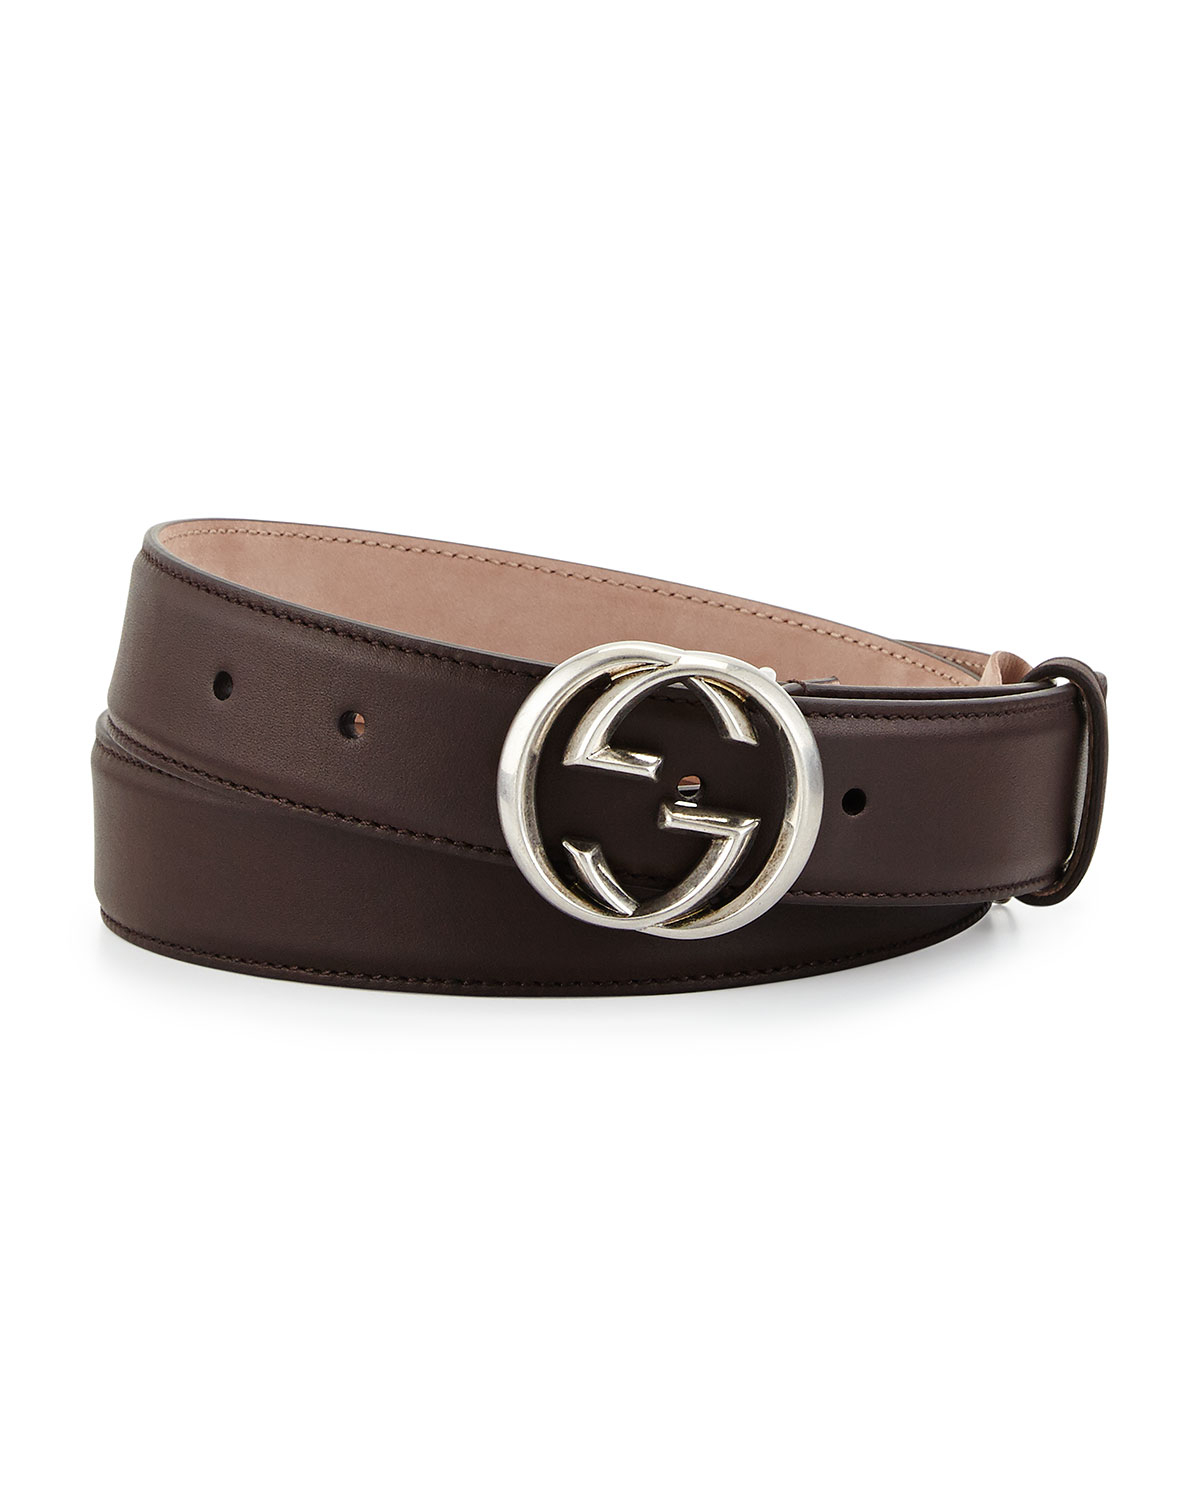 Gucci Leather Gg Buckle Belt in Brown - Lyst